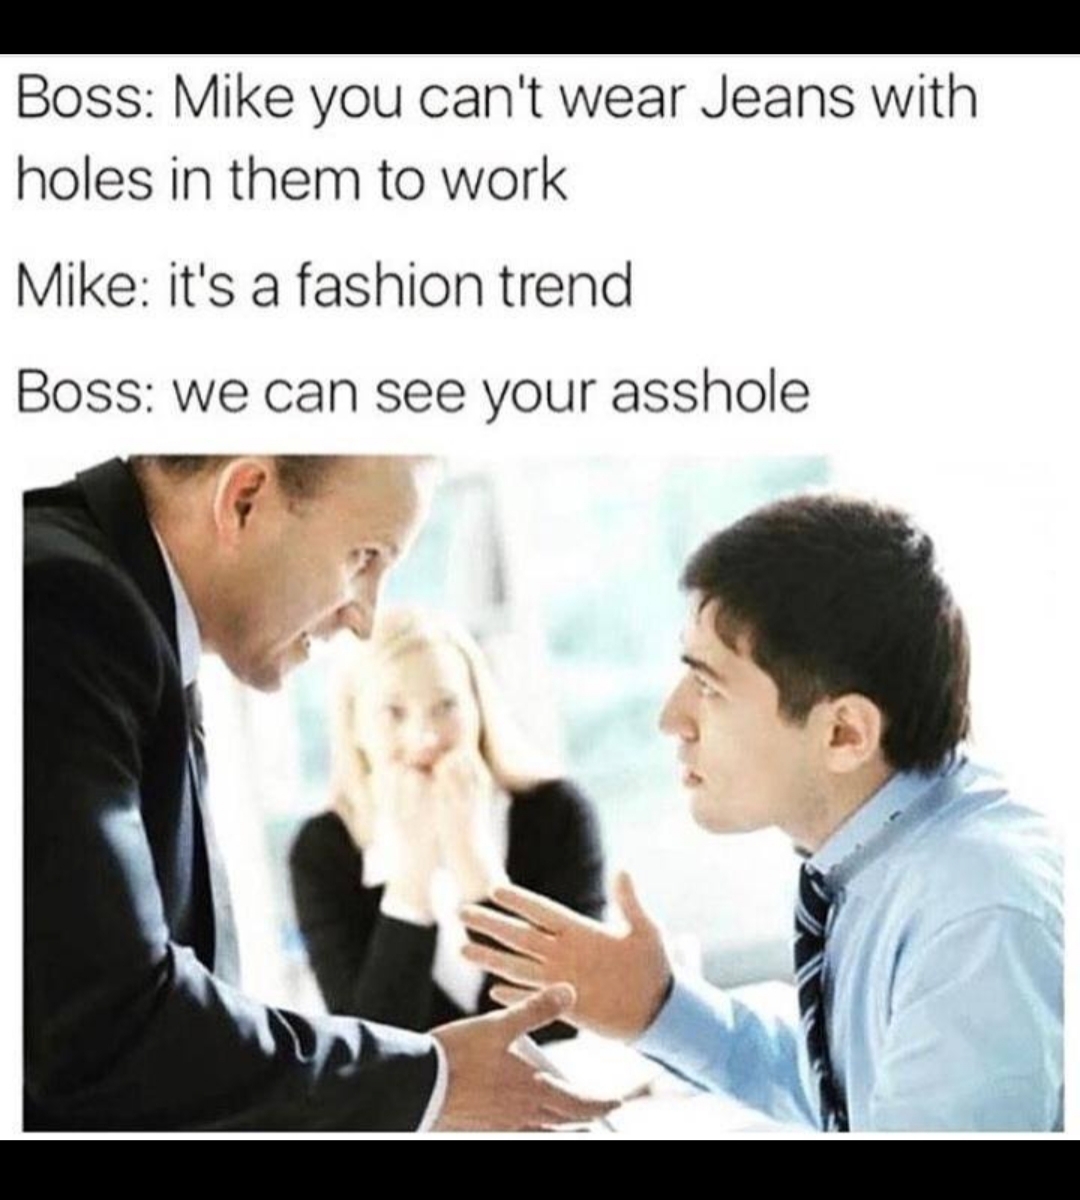 meme of cocaine and adderall memes - Boss Mike you can't wear Jeans with holes in them to work Mike it's a fashion trend Boss we can see your asshole